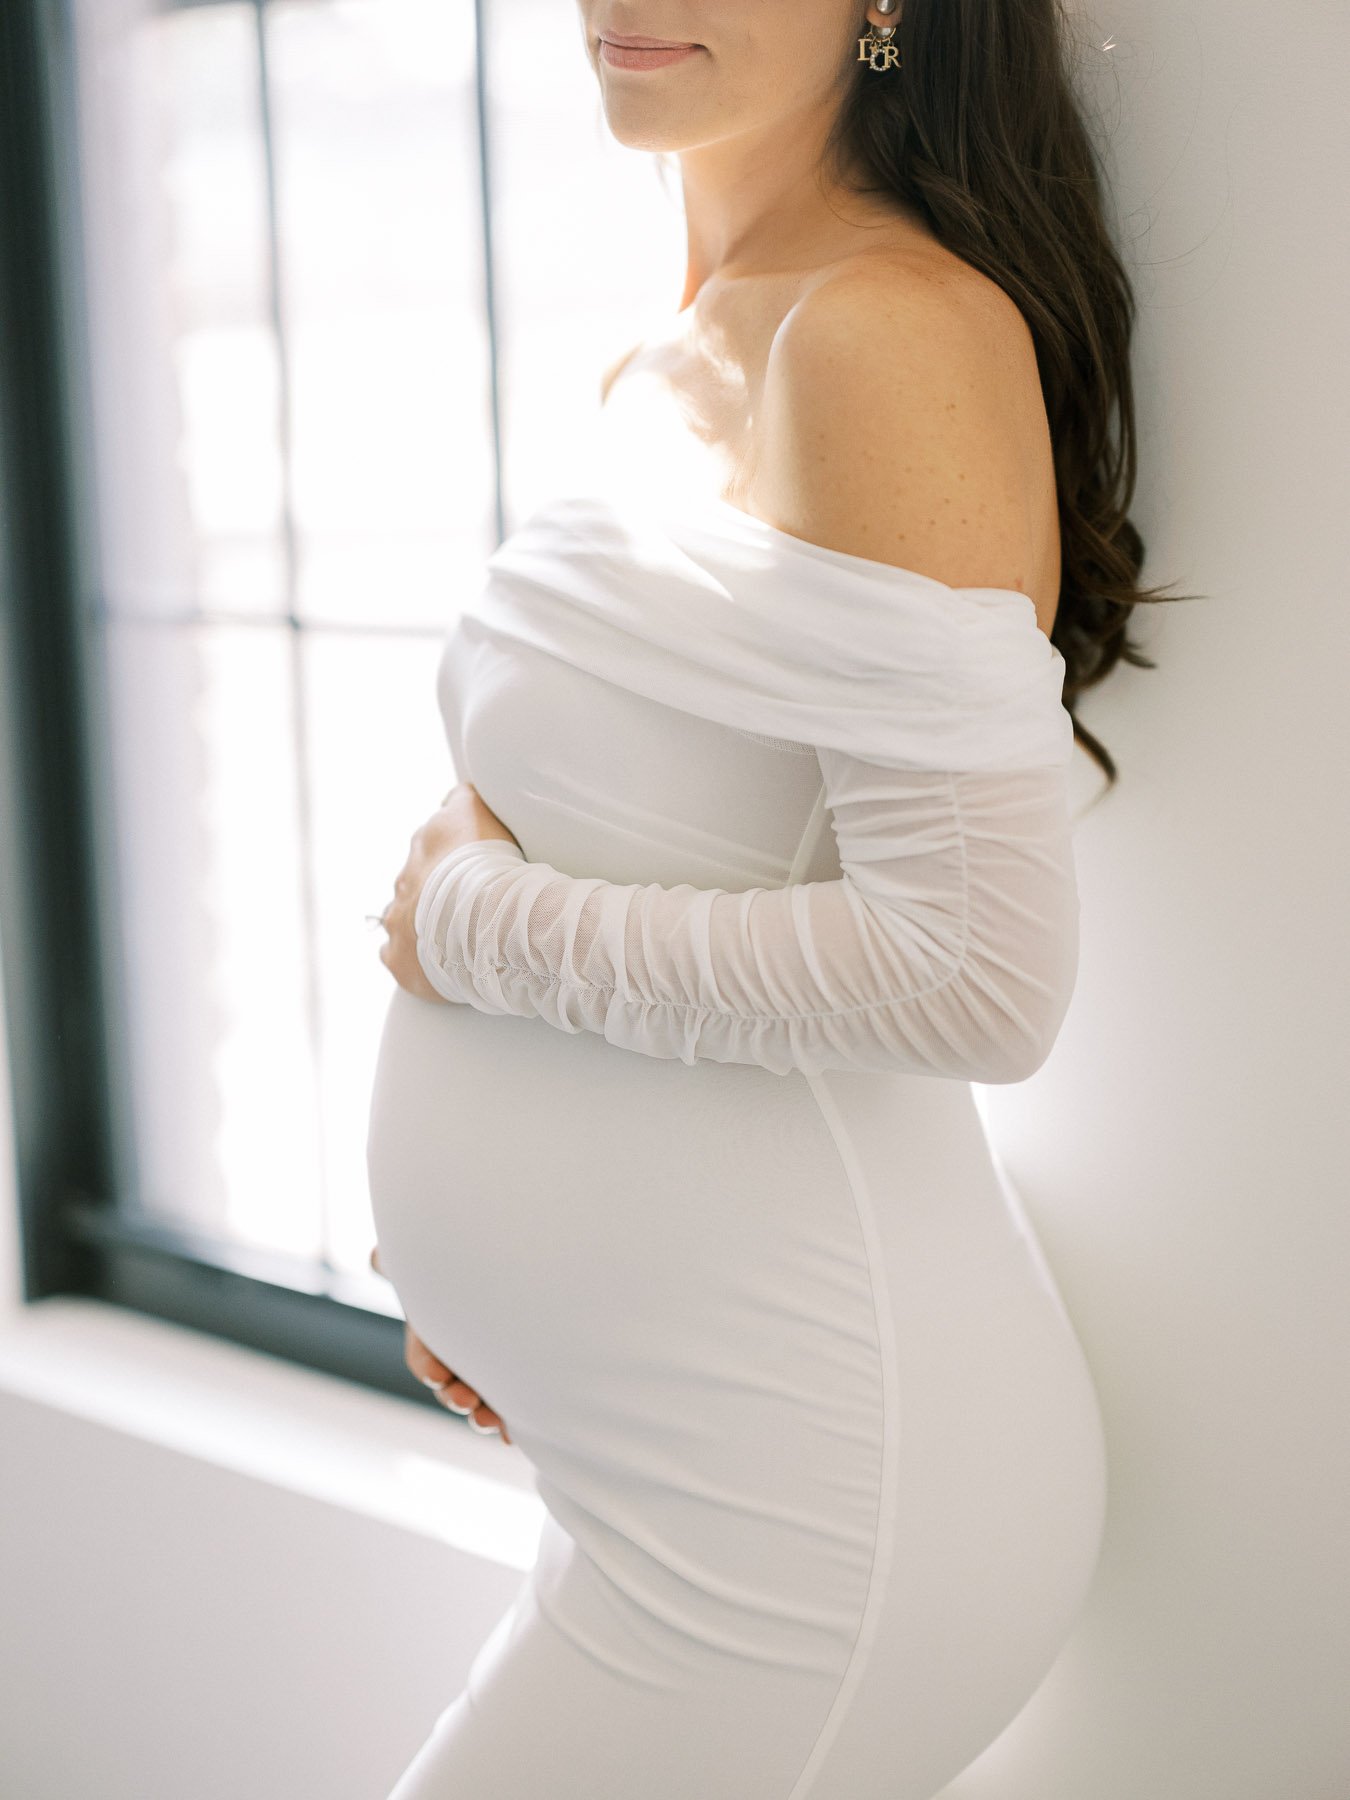 Simeone Maternity by Michelle Lange Photography-25.jpg